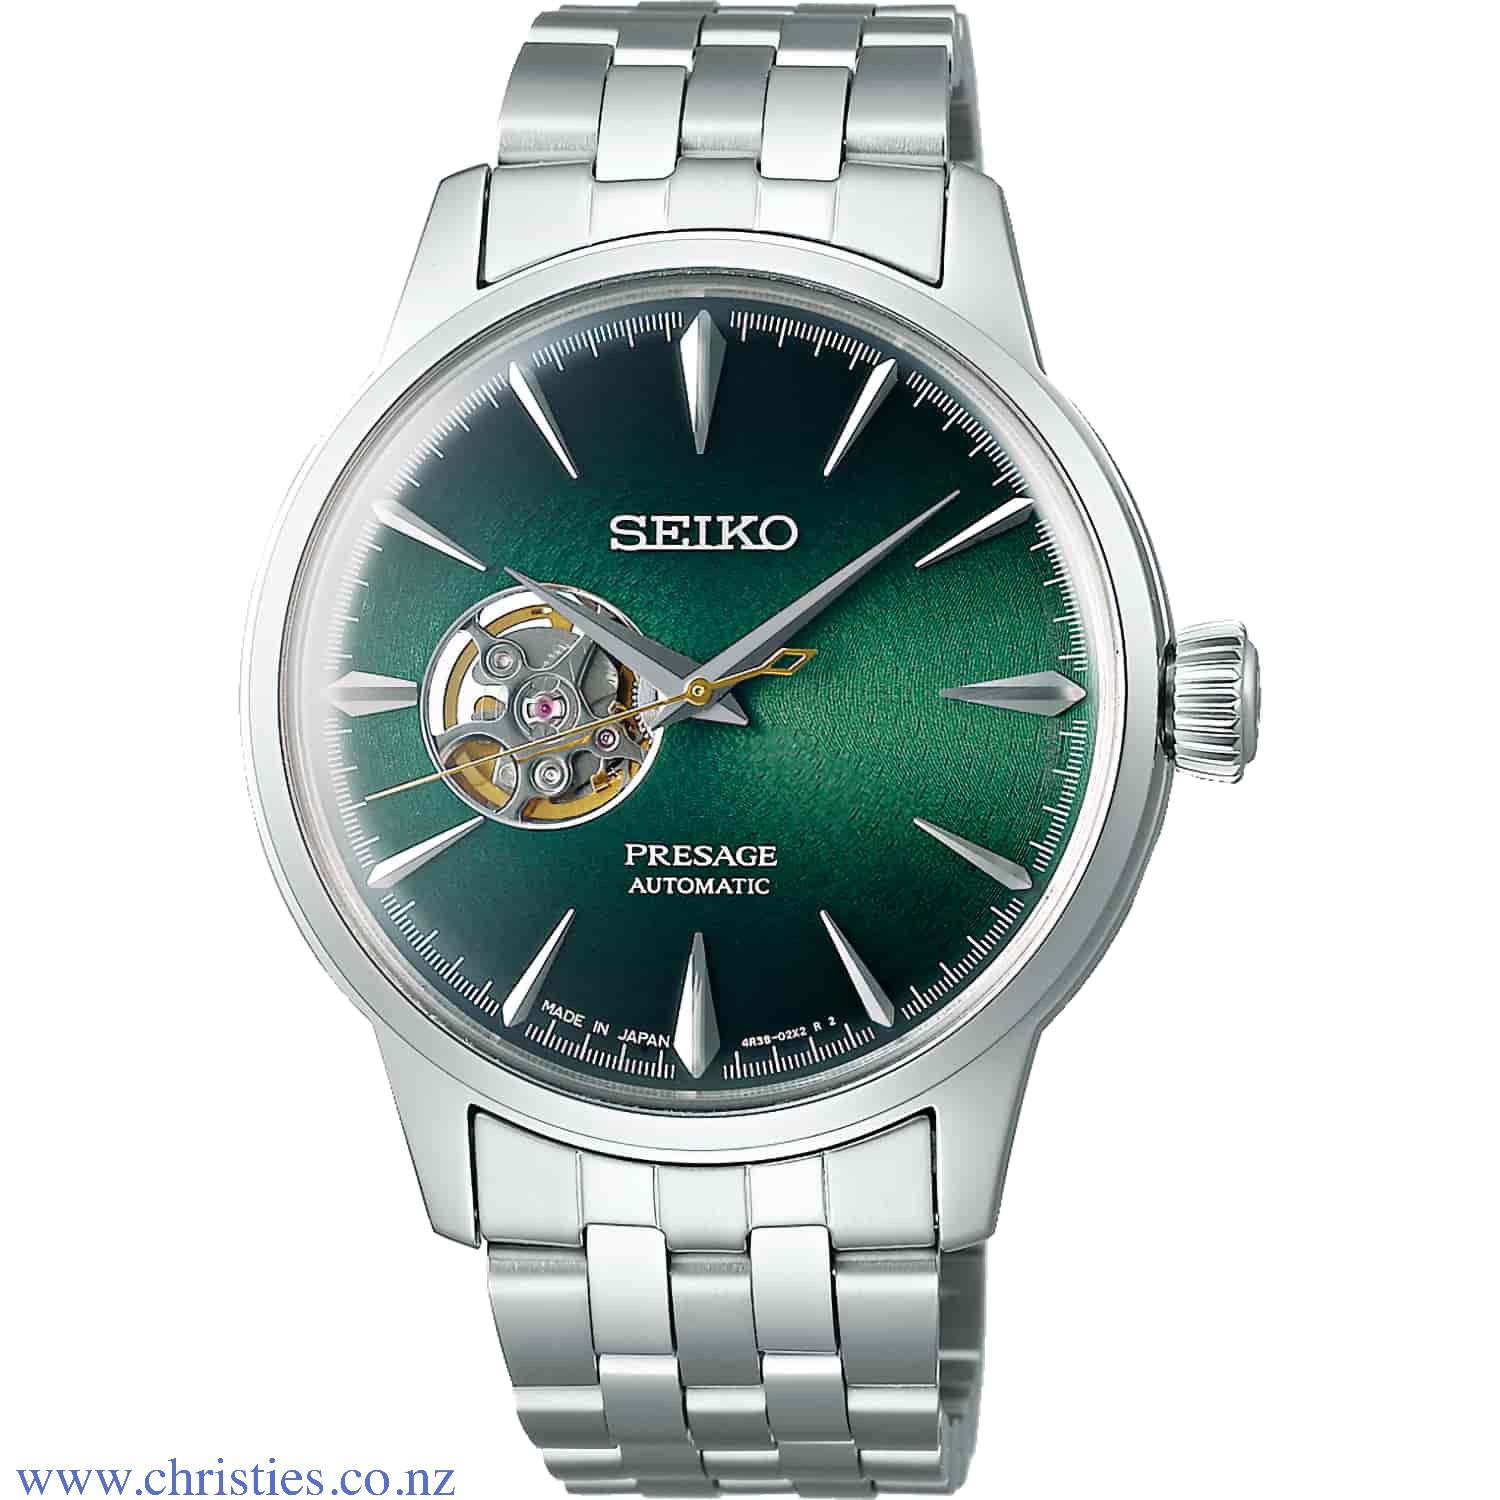 SSA441J Seiko Presage Automatic Mens Cocktail Time Watch. Seiko SSA441J Seiko Presage Automatic Mens Cocktail Time Watch featuring a green skeleton dial Afterpay - Split your purchase into 4 instalments - Pay for your purchase over 4 instalments, due ever